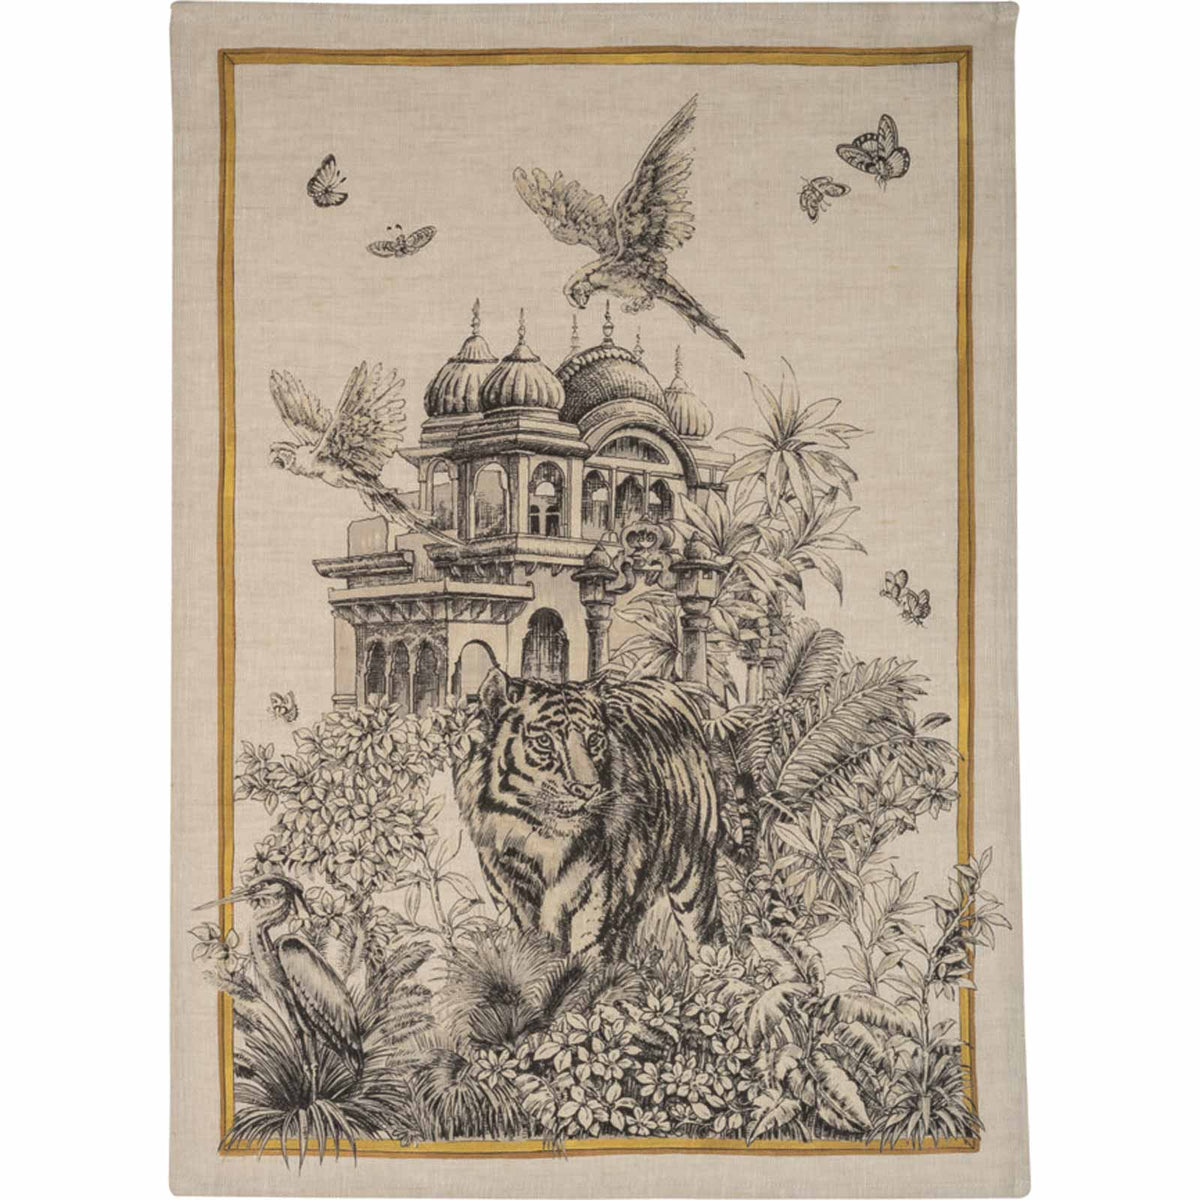 This TTT Morocco Linen Kitchen Towels Set/2 features a captivating drawing of a tiger and birds. Made from high-quality linen and hemp fabric sourced from an Italian mill.